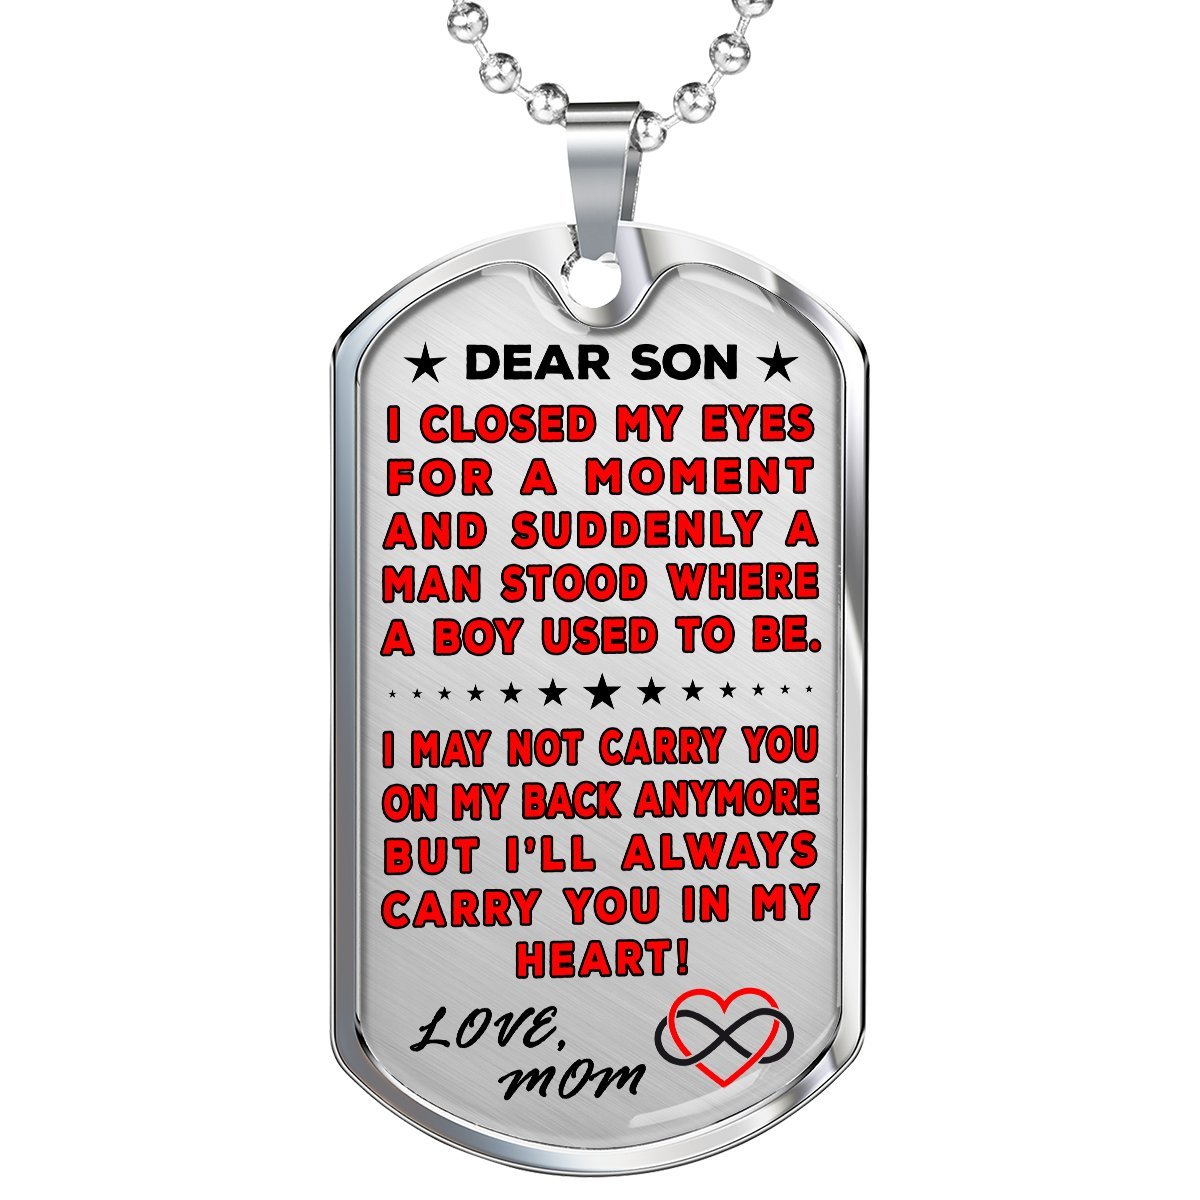 Mom To Son "You're In My Heart" Dog Tag | Heroic Defender